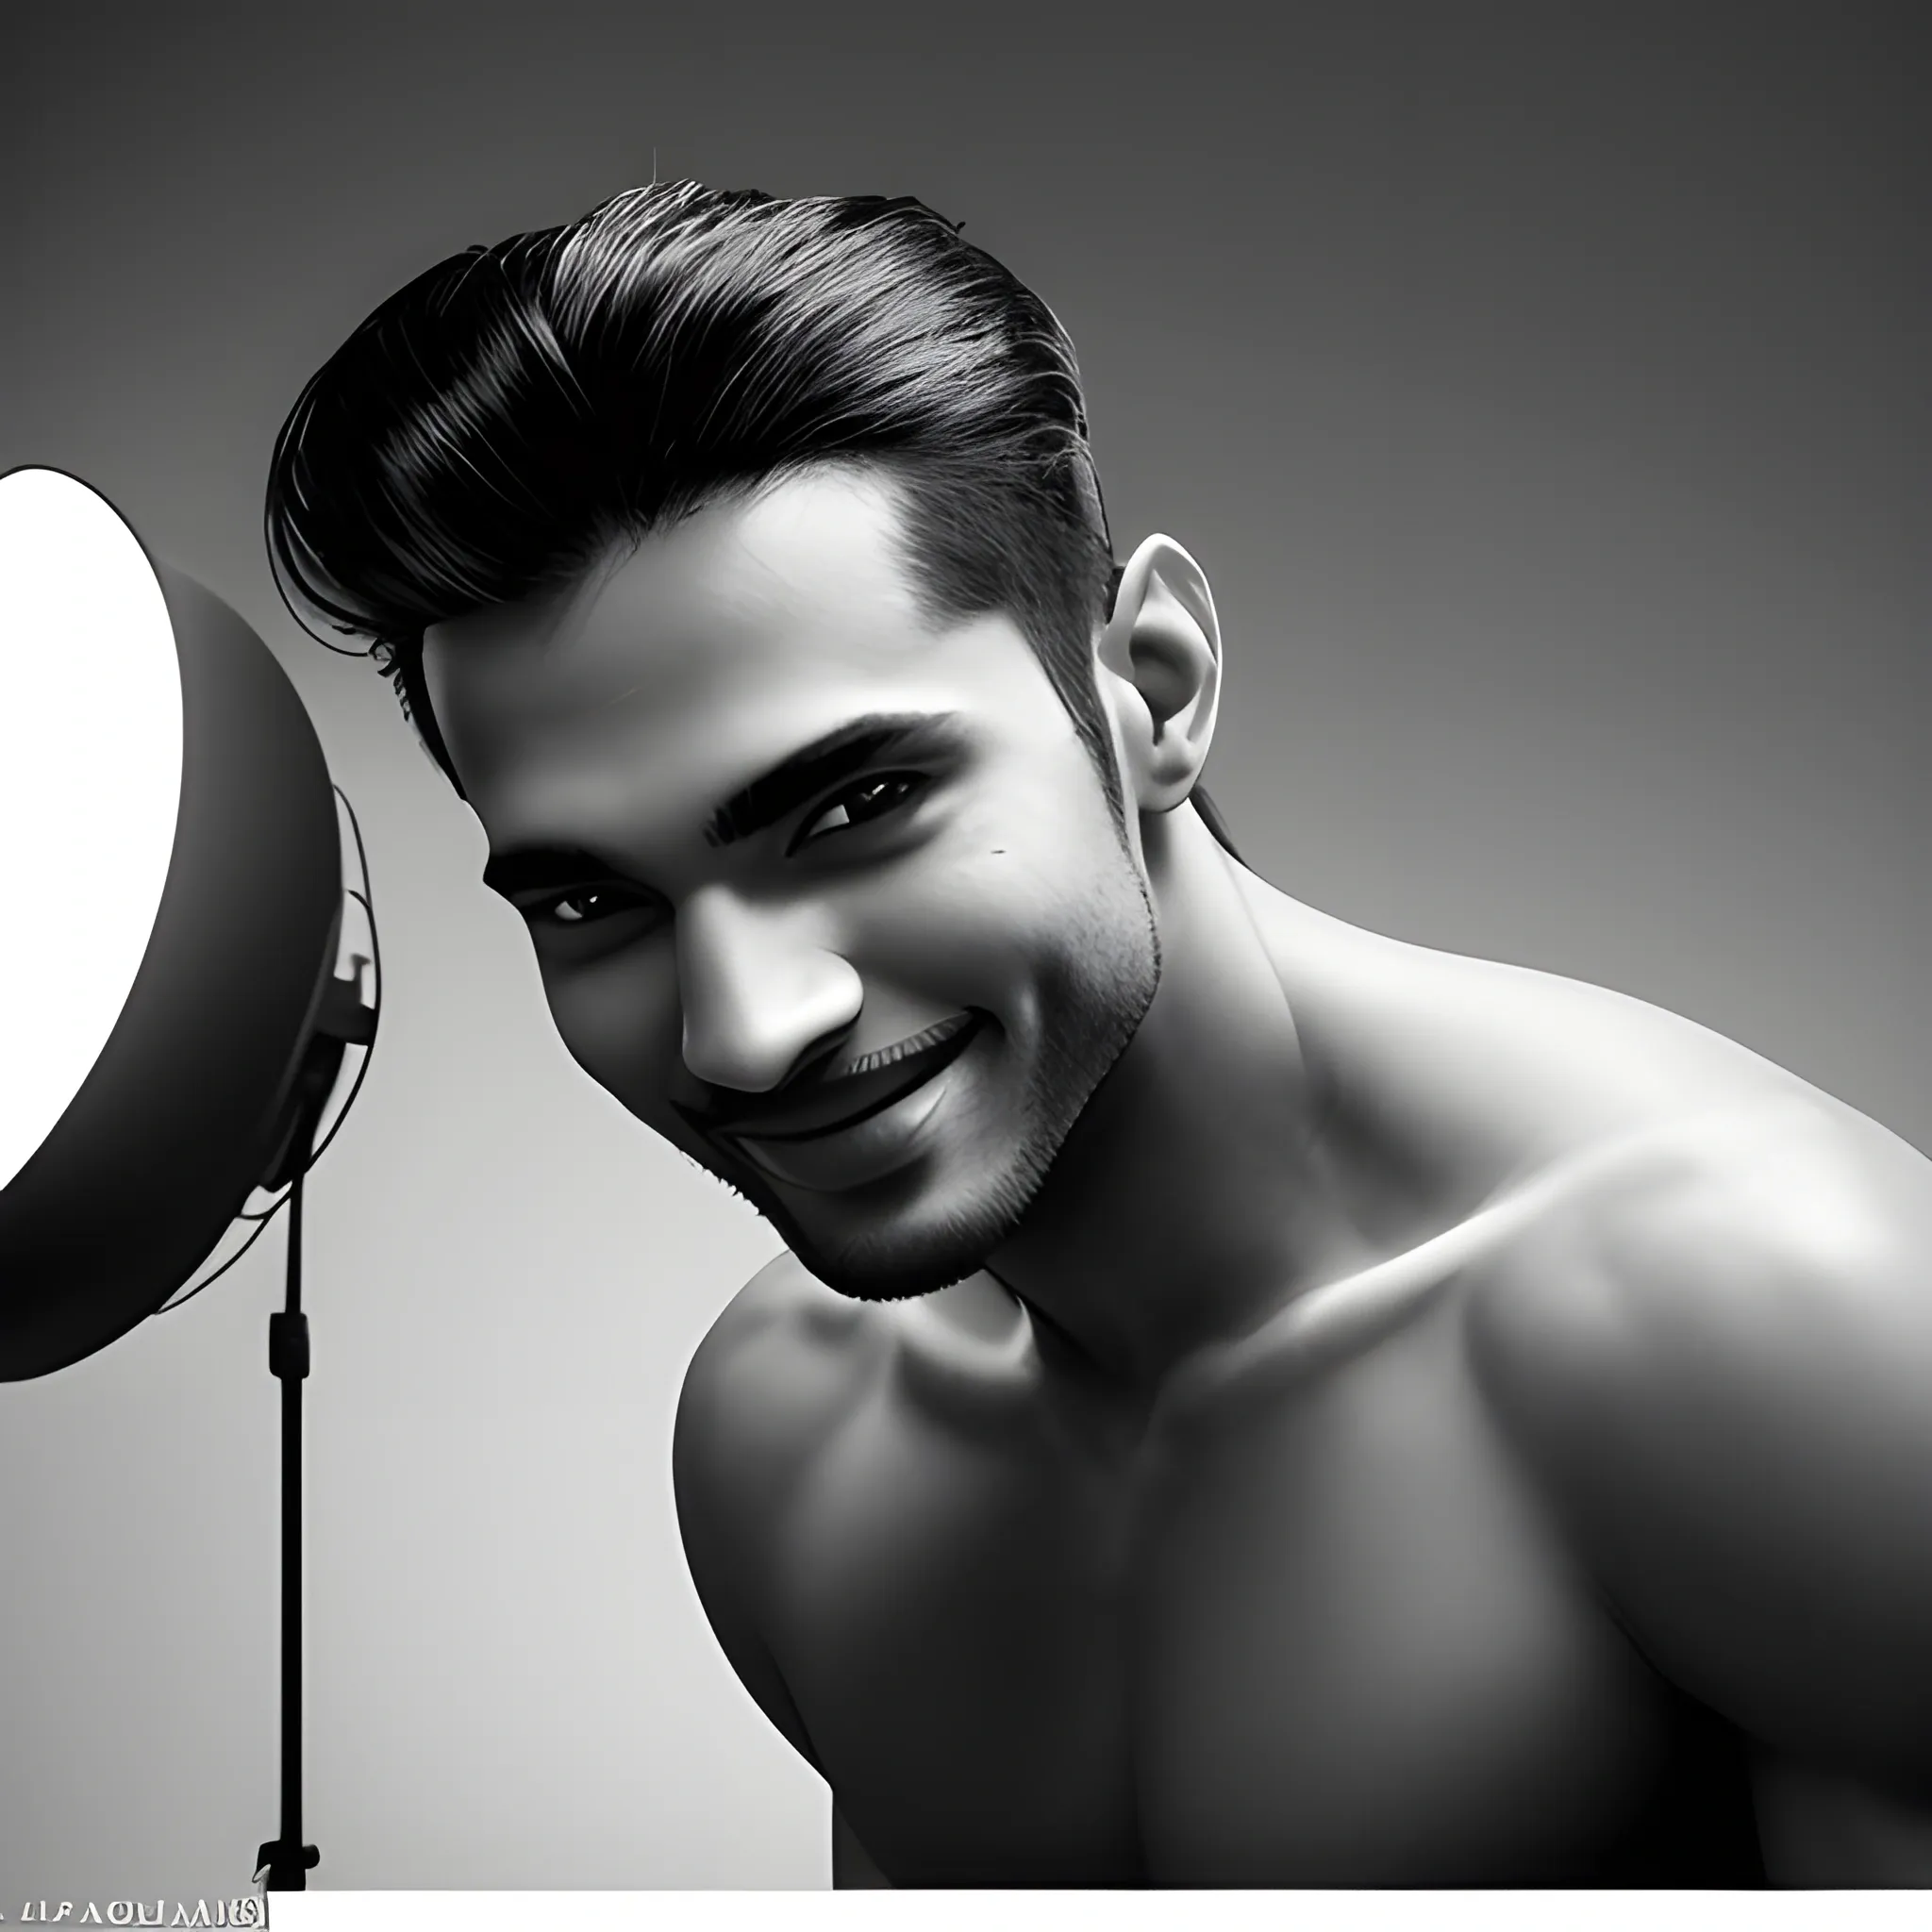 Indian male model Stock Photos, Royalty Free Indian male model Images |  Depositphotos